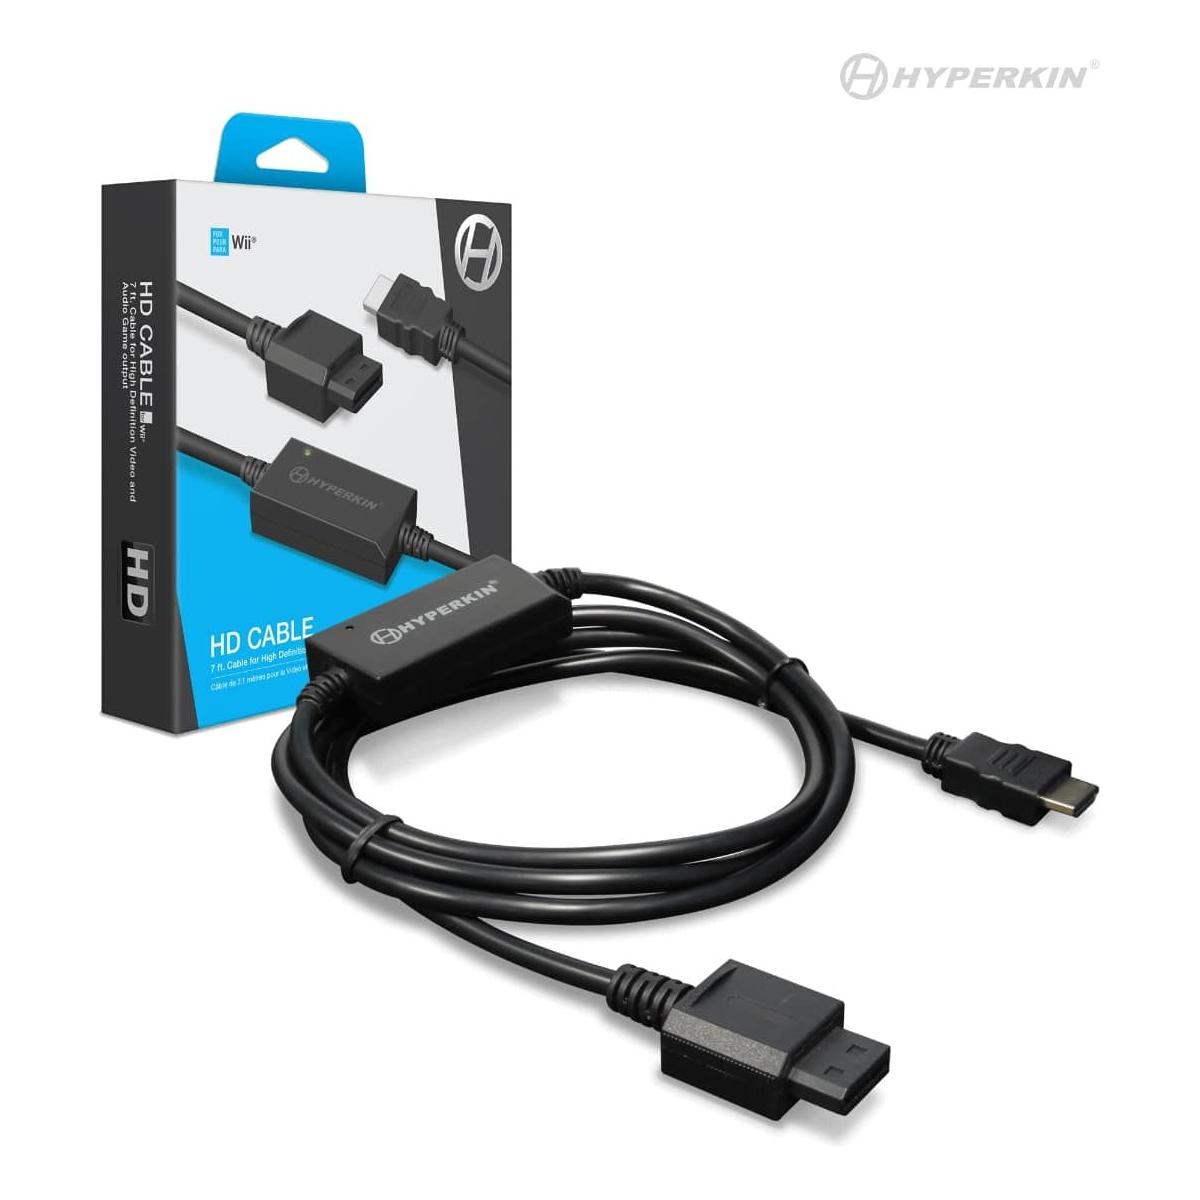 HDMI Cable Adapter for Wii Consoles